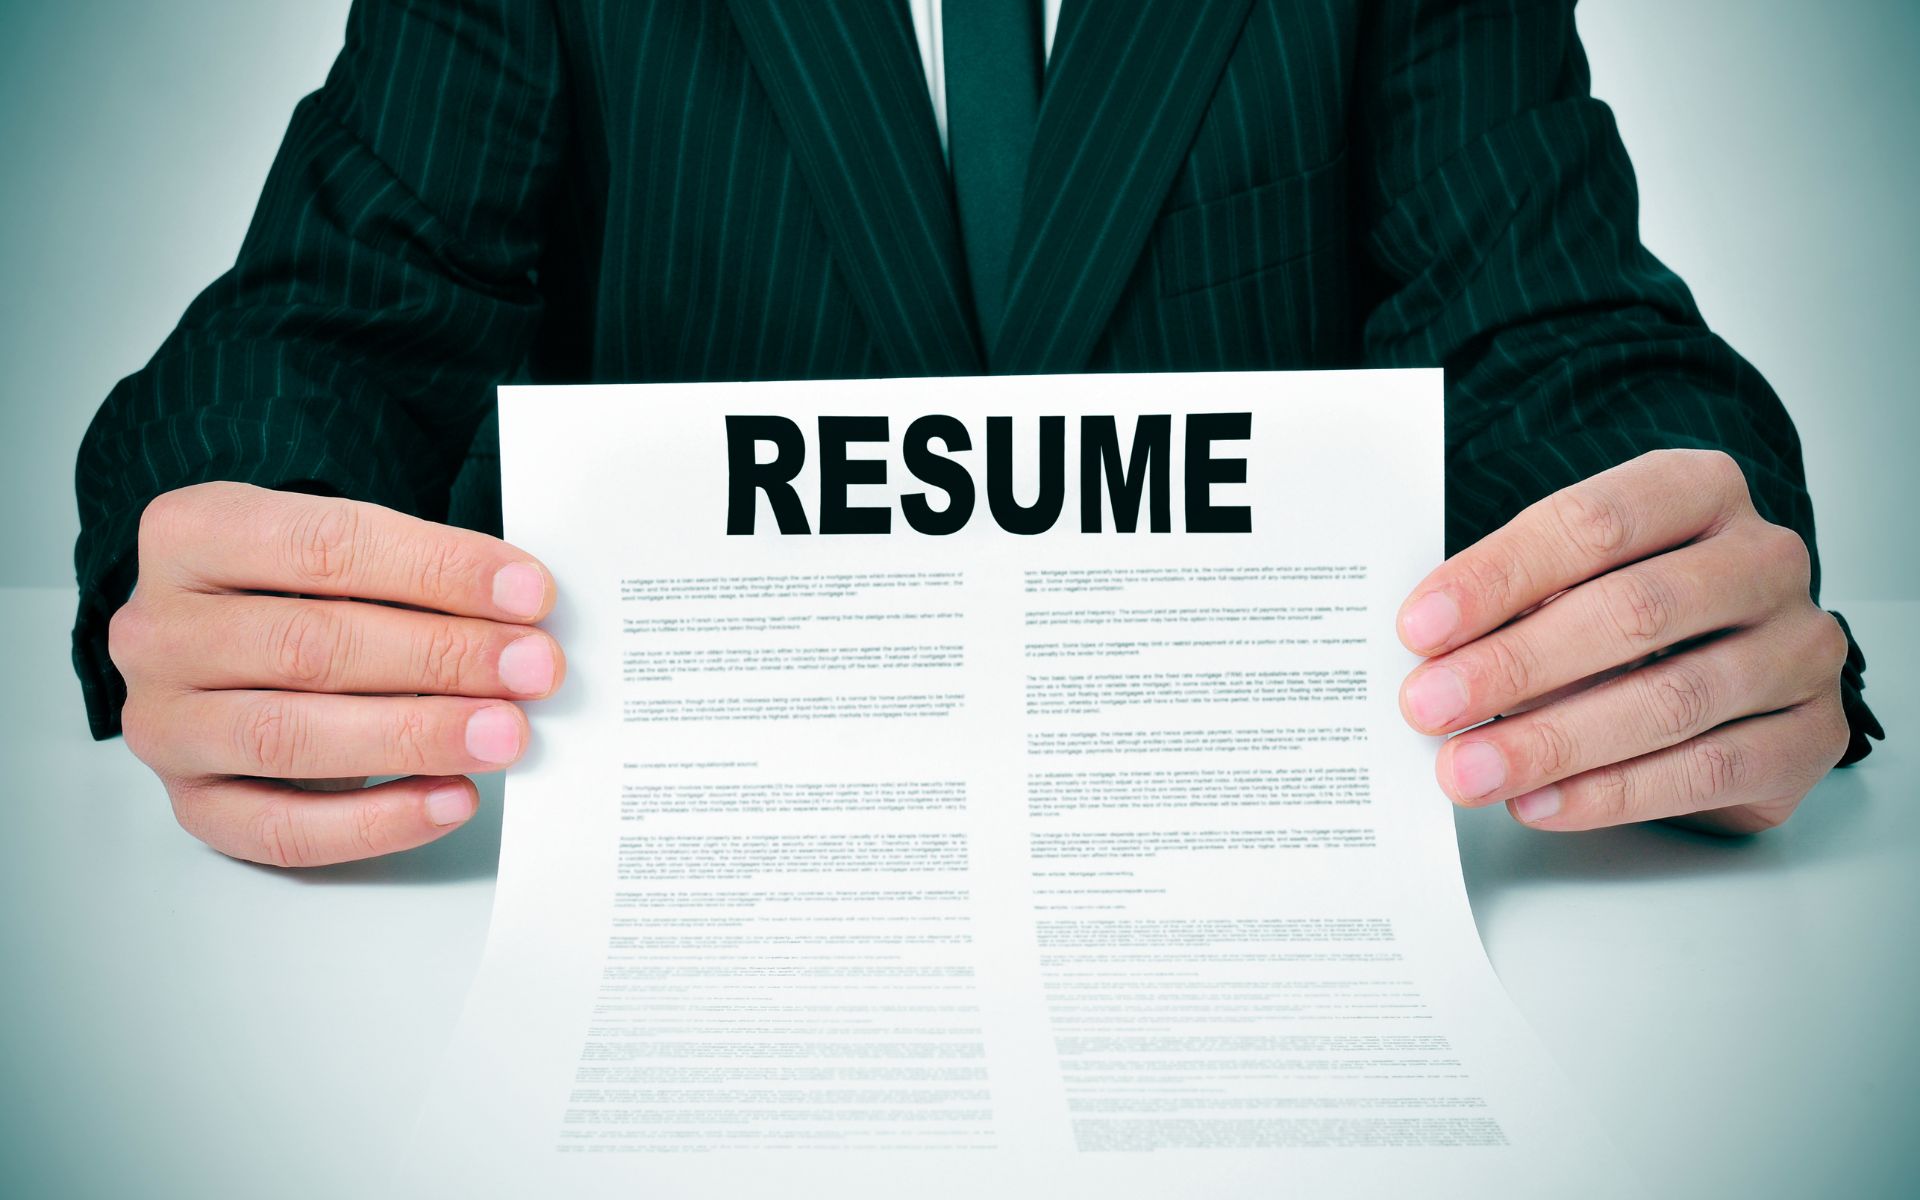 Have a Clear Understanding of Your Resume and Work History